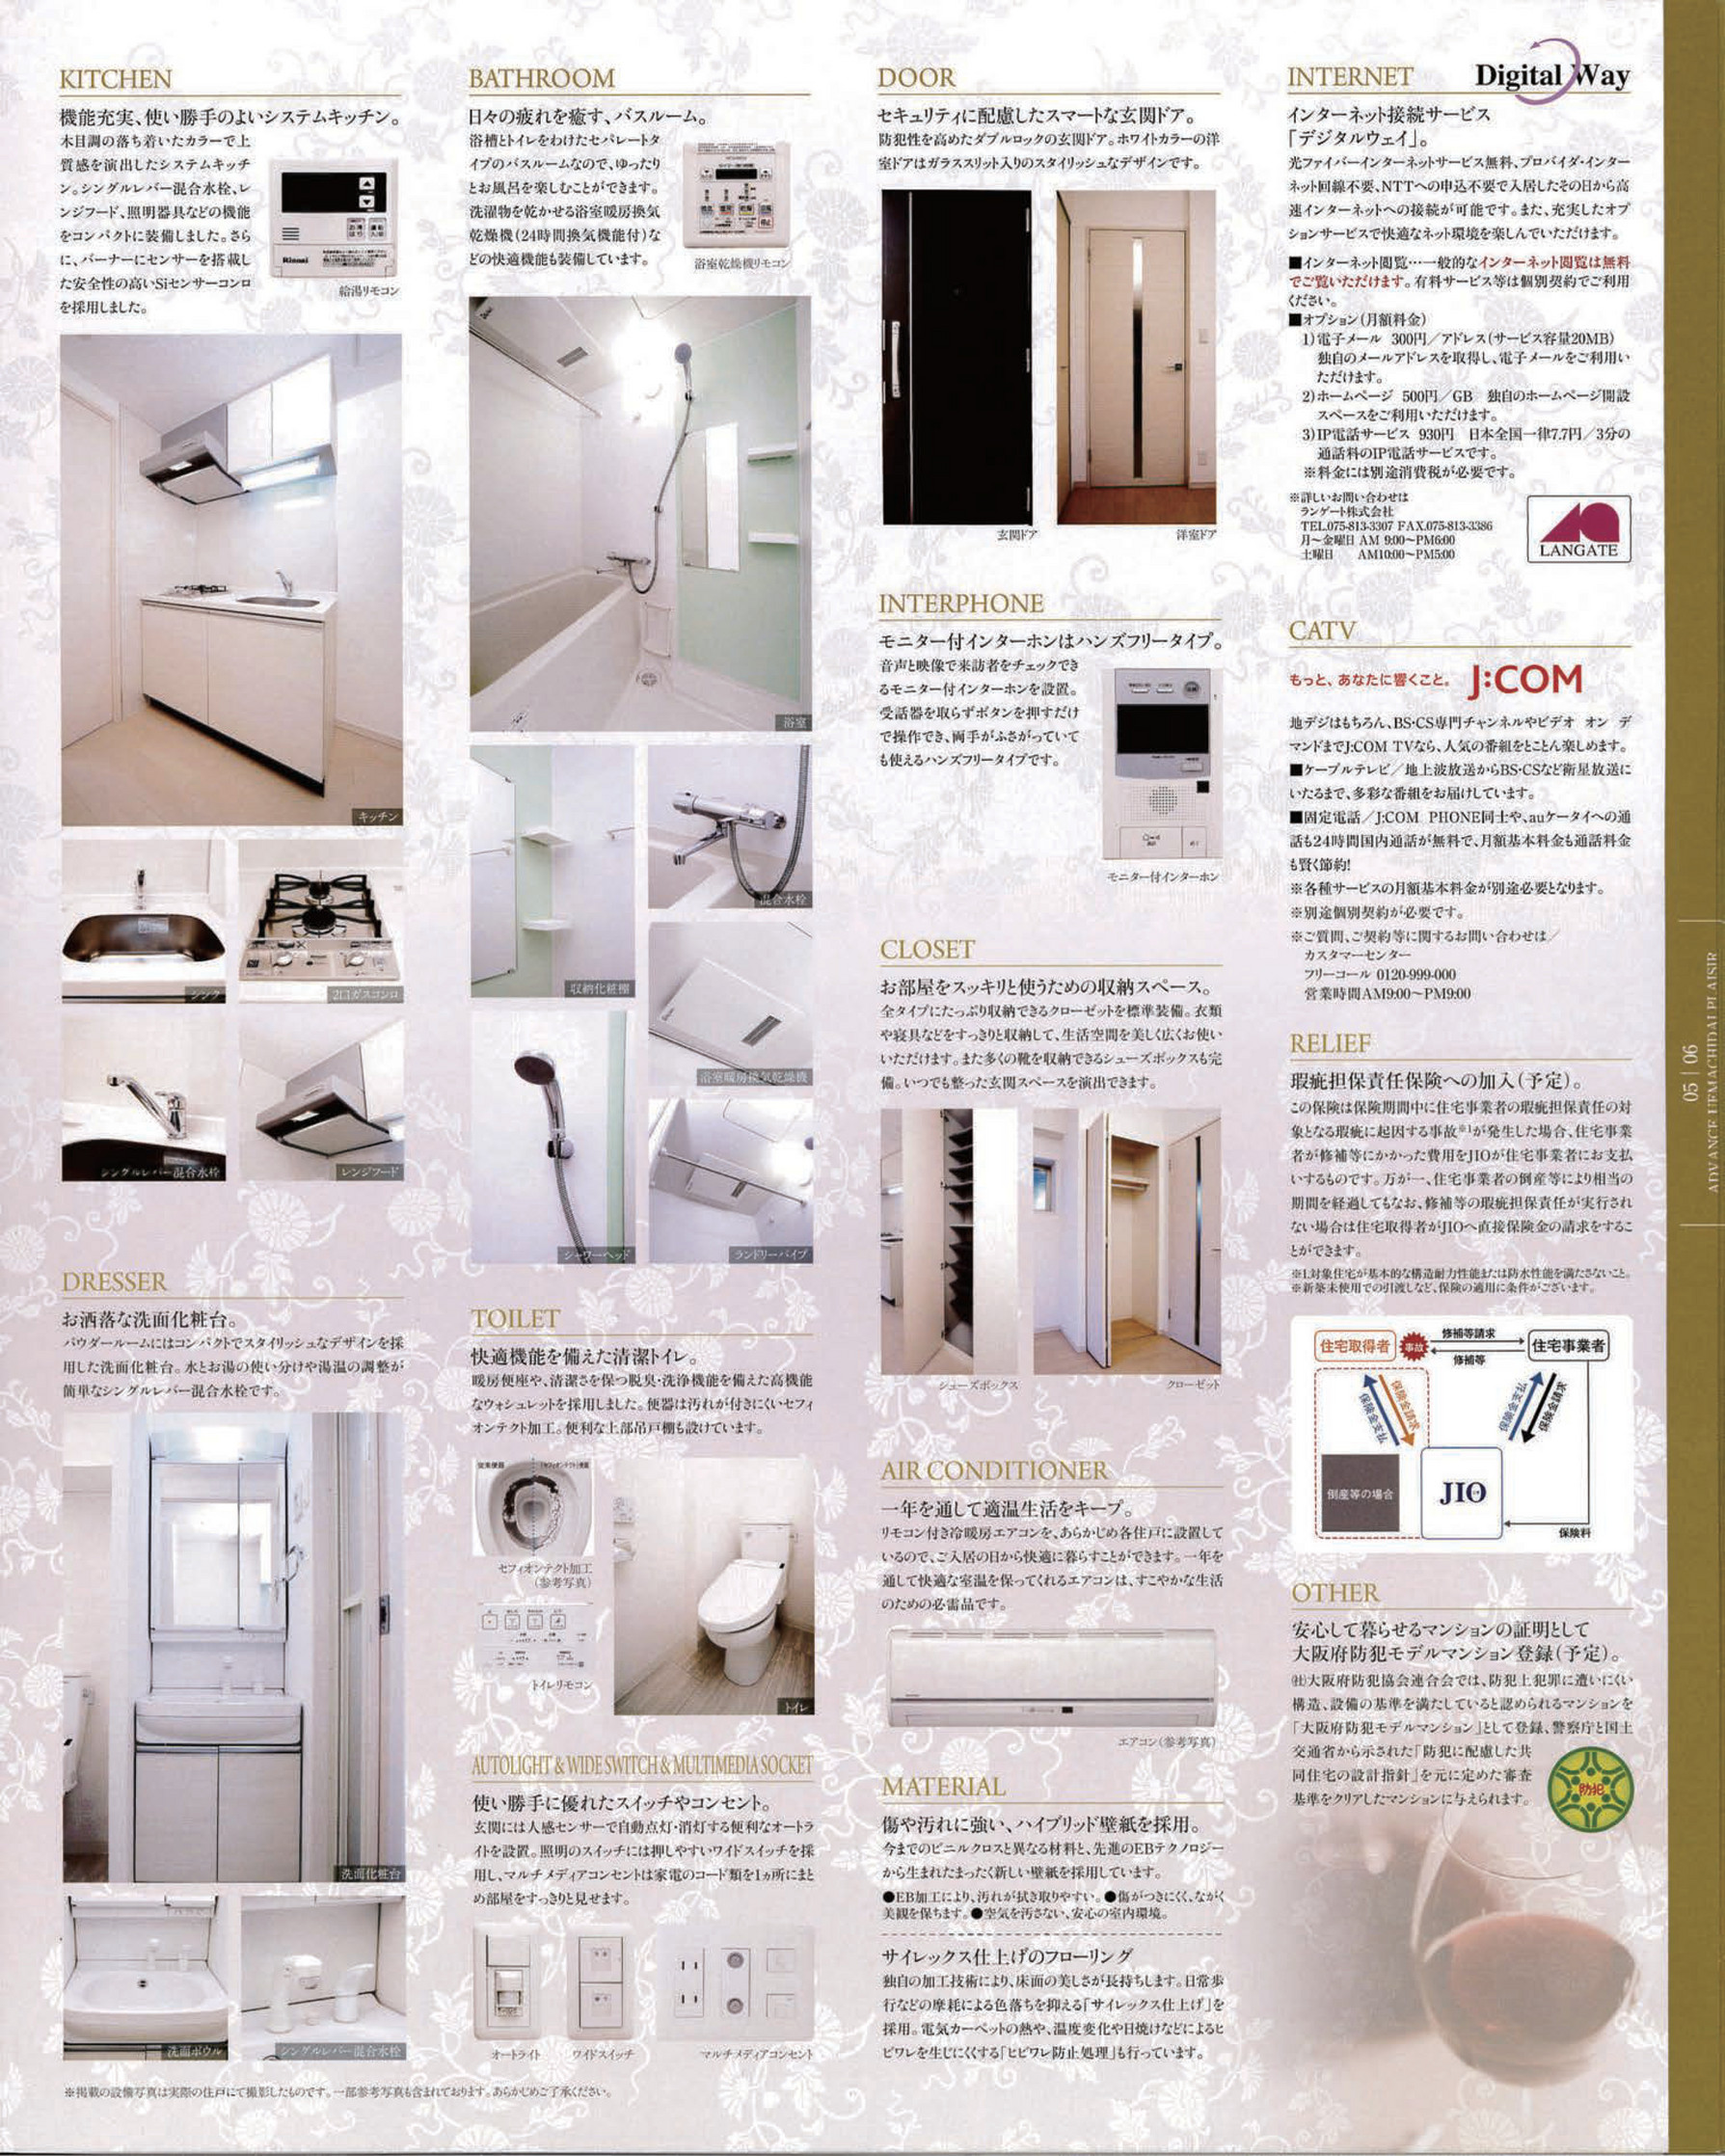 Real Estate アドバンス 上町台 プレジール Page 8 9 Created With Publitas Com